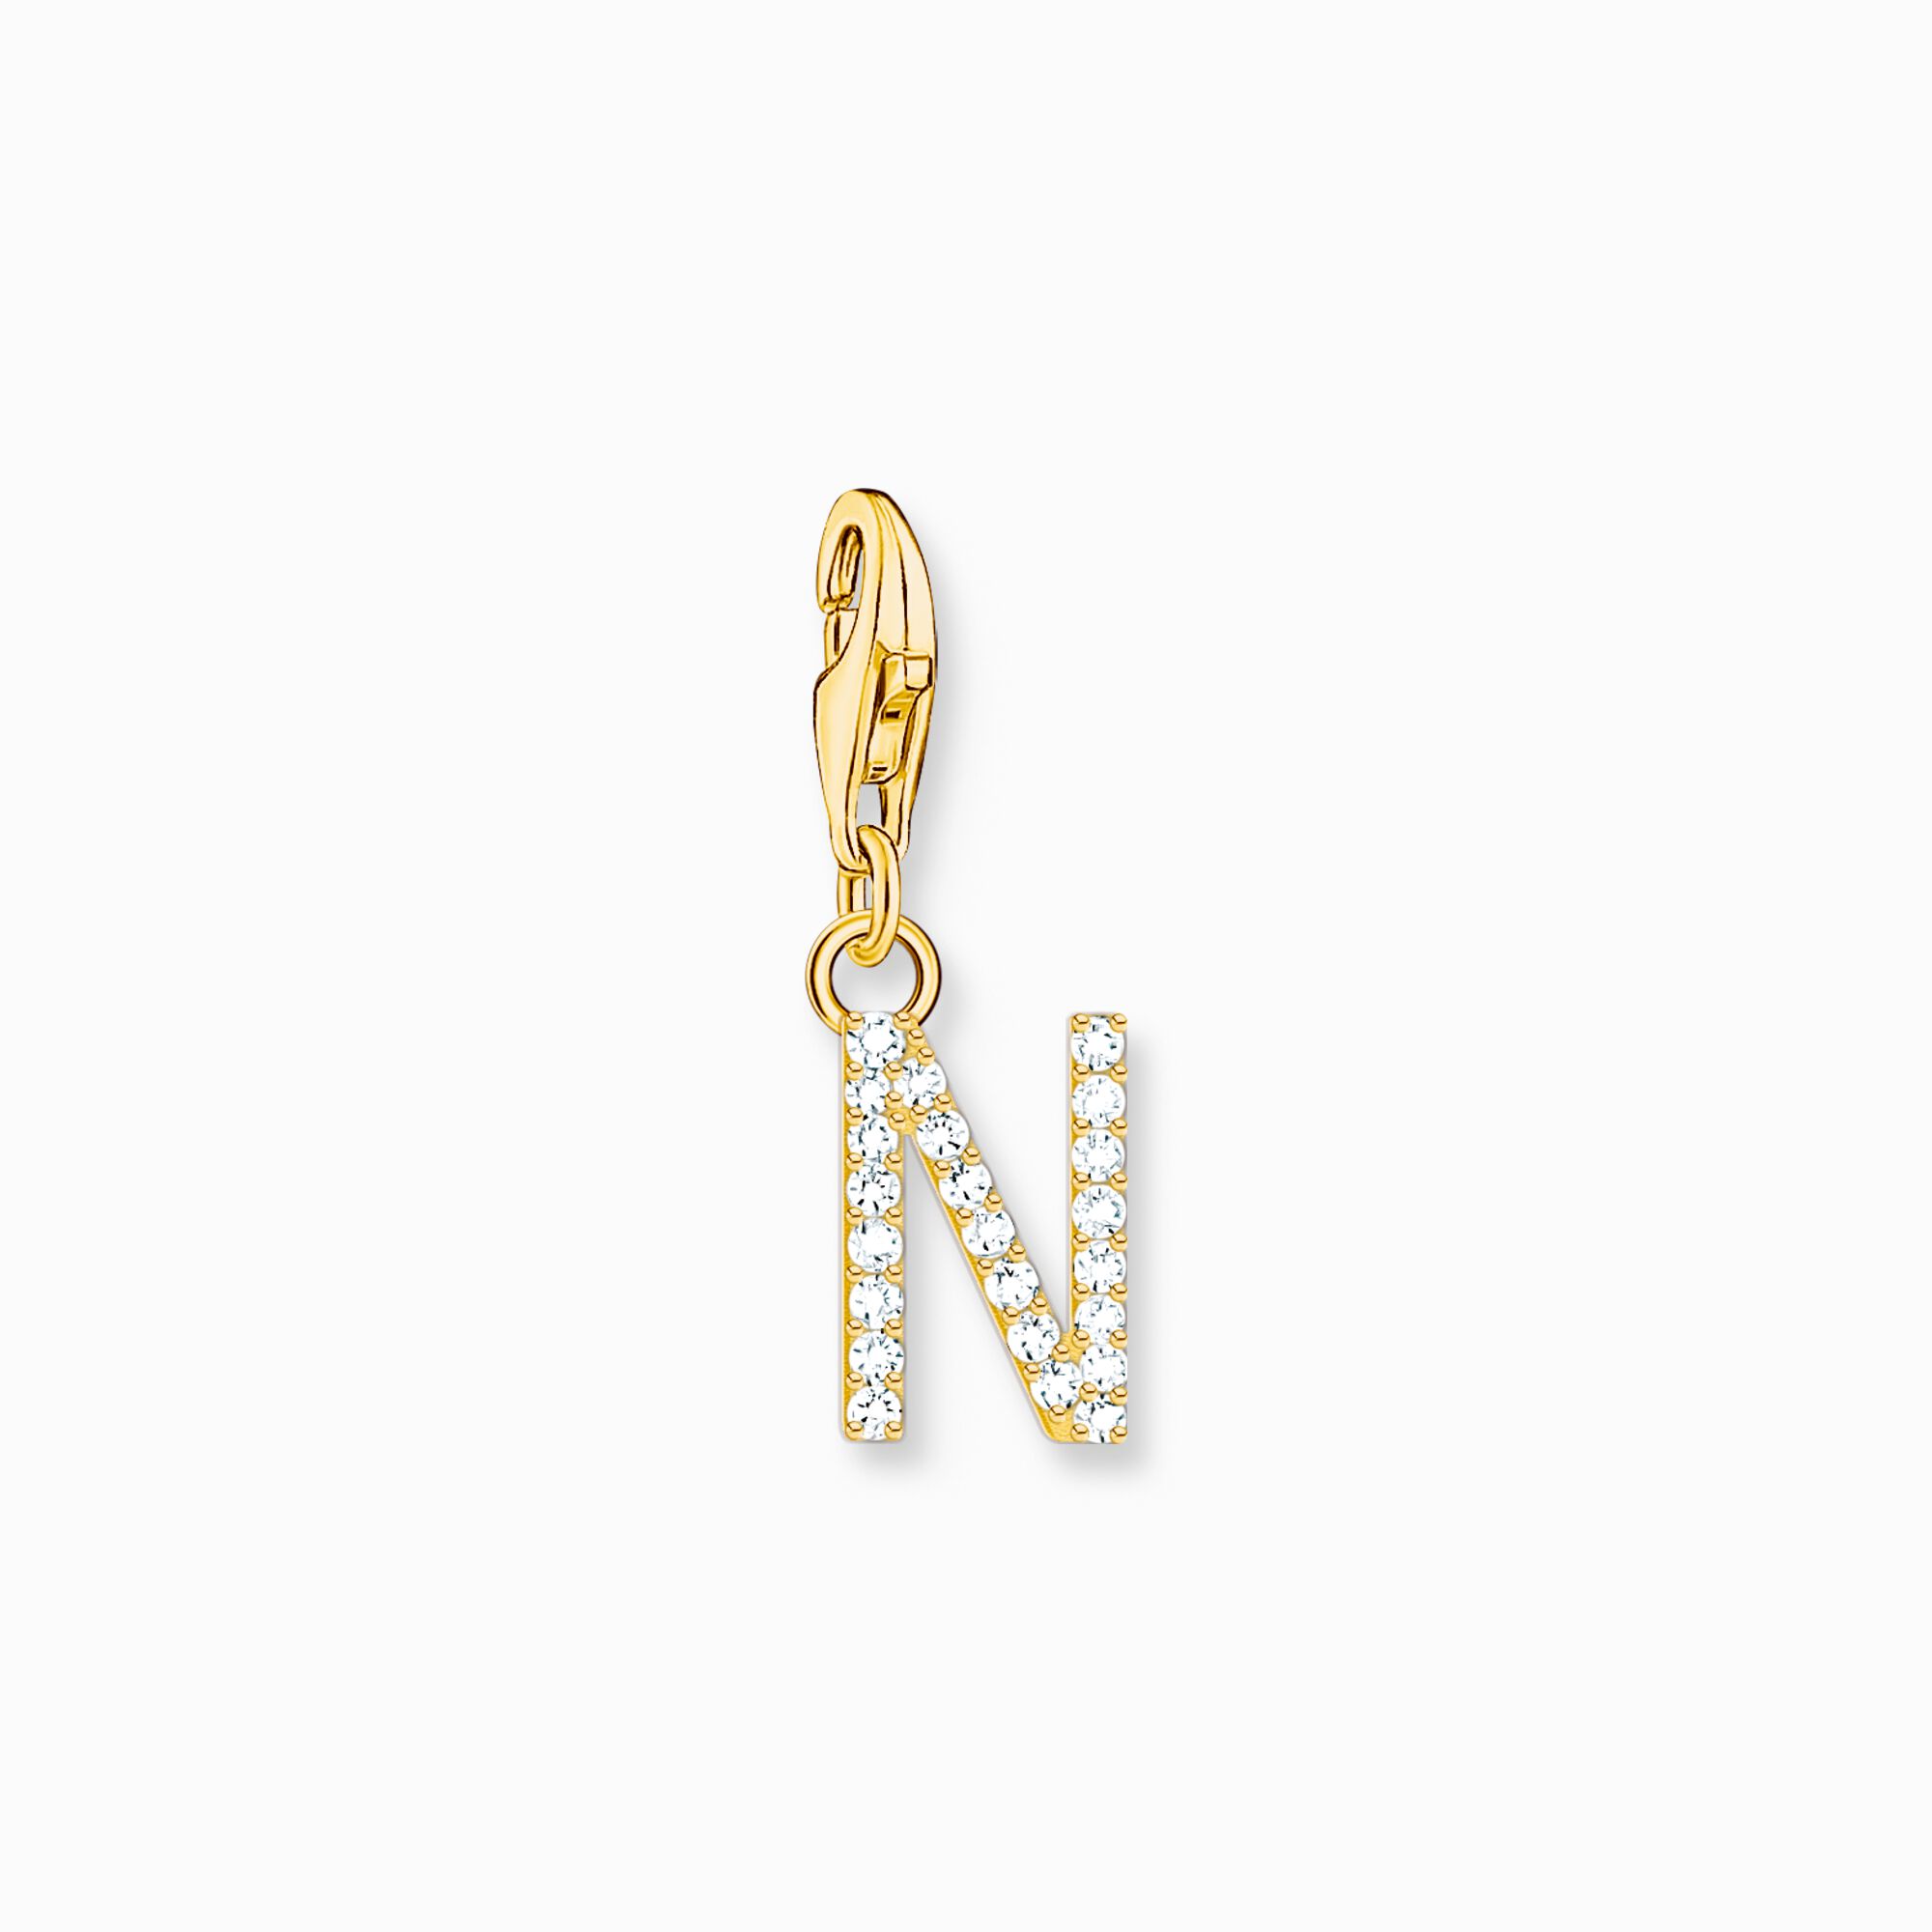 Charm pendant letter N with white stones gold plated from the Charm Club collection in the THOMAS SABO online store